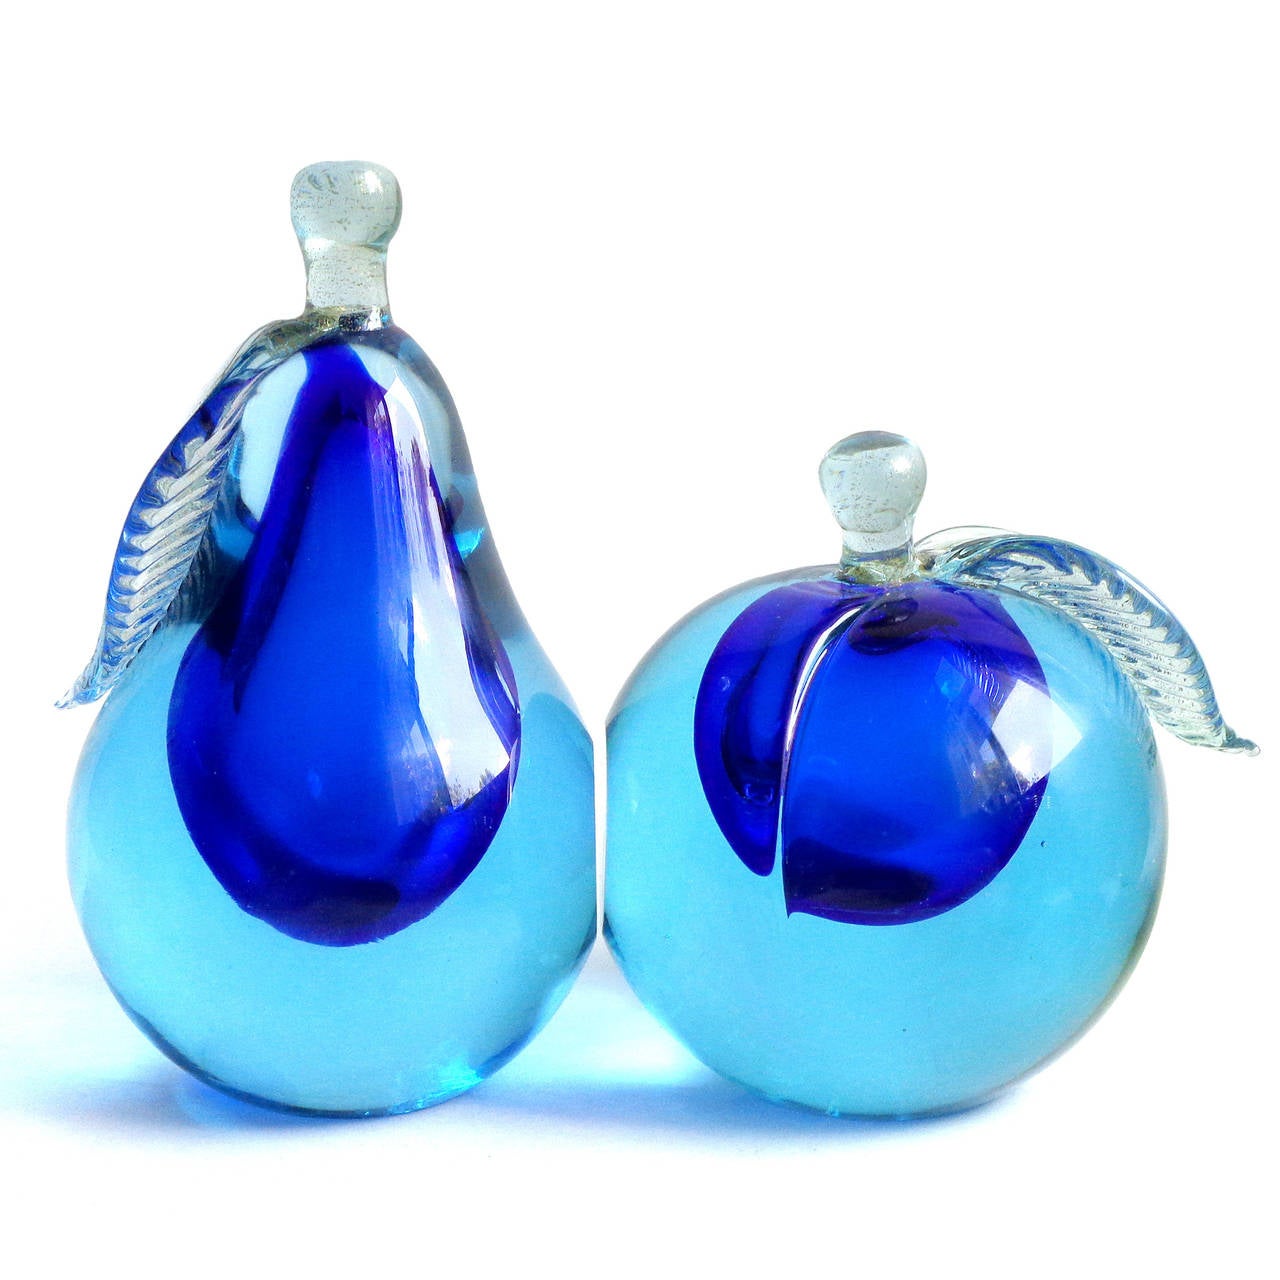 Free shipping worldwide! See details below description.

Gorgeous Murano hand blown, Sommerso light blue over cobalt blue art glass pear and apple fruit bookends. Documented to designer Alfredo Barbini, circa 1950-1960s and published in his